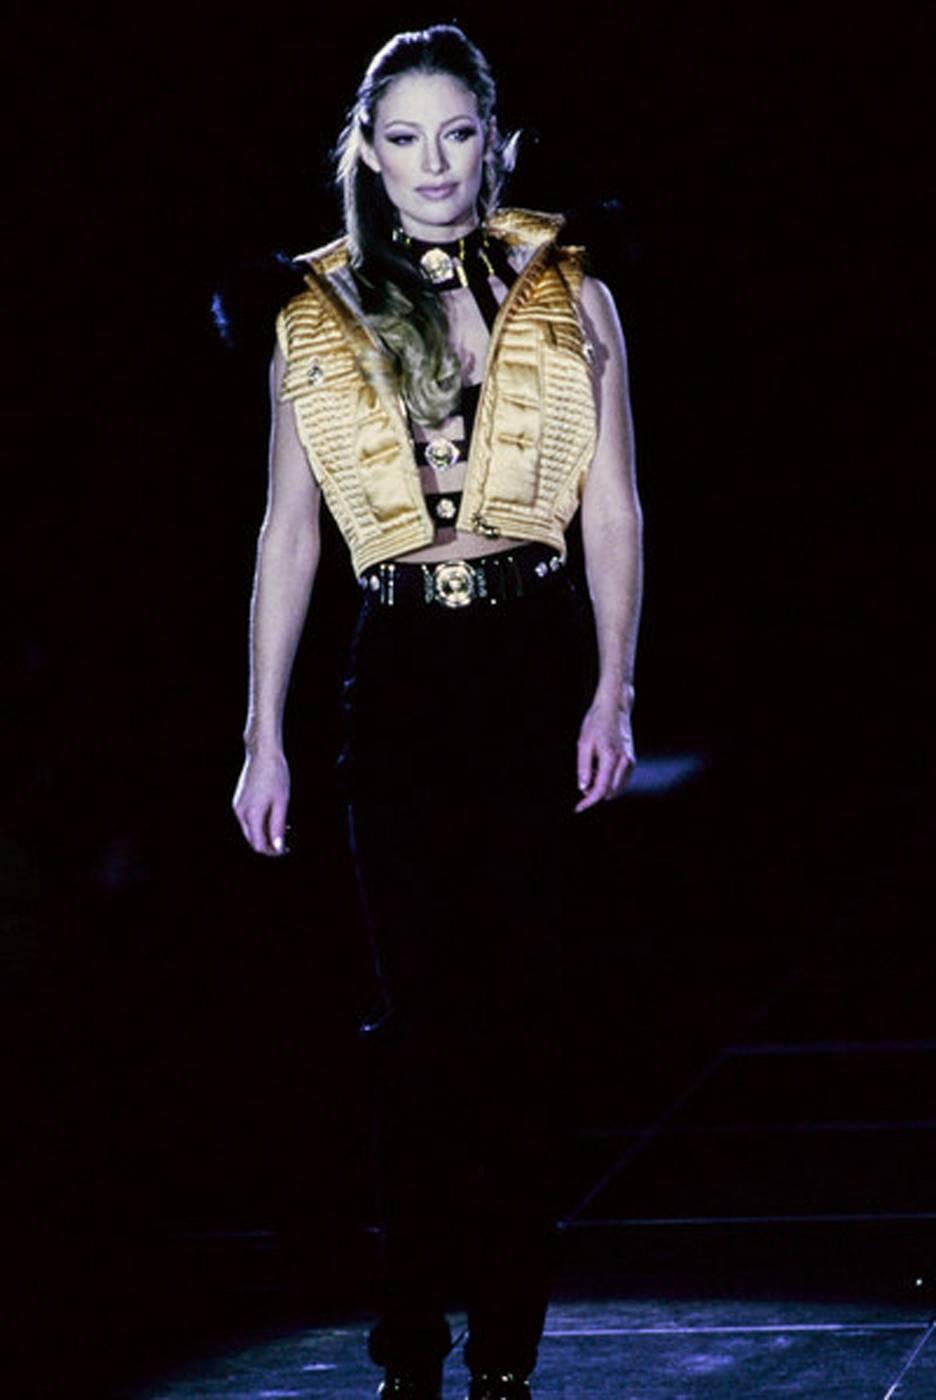 Gianni Versace's Fall 1992 collection, provocatively titled Miss S&M, ... Linda Evangelista wears this same satin puffer vest on the catwalk in yellow..
Vogue reports…

“Gianni Versace’s Fall 1992 collection, provocatively titled Miss S&M, had